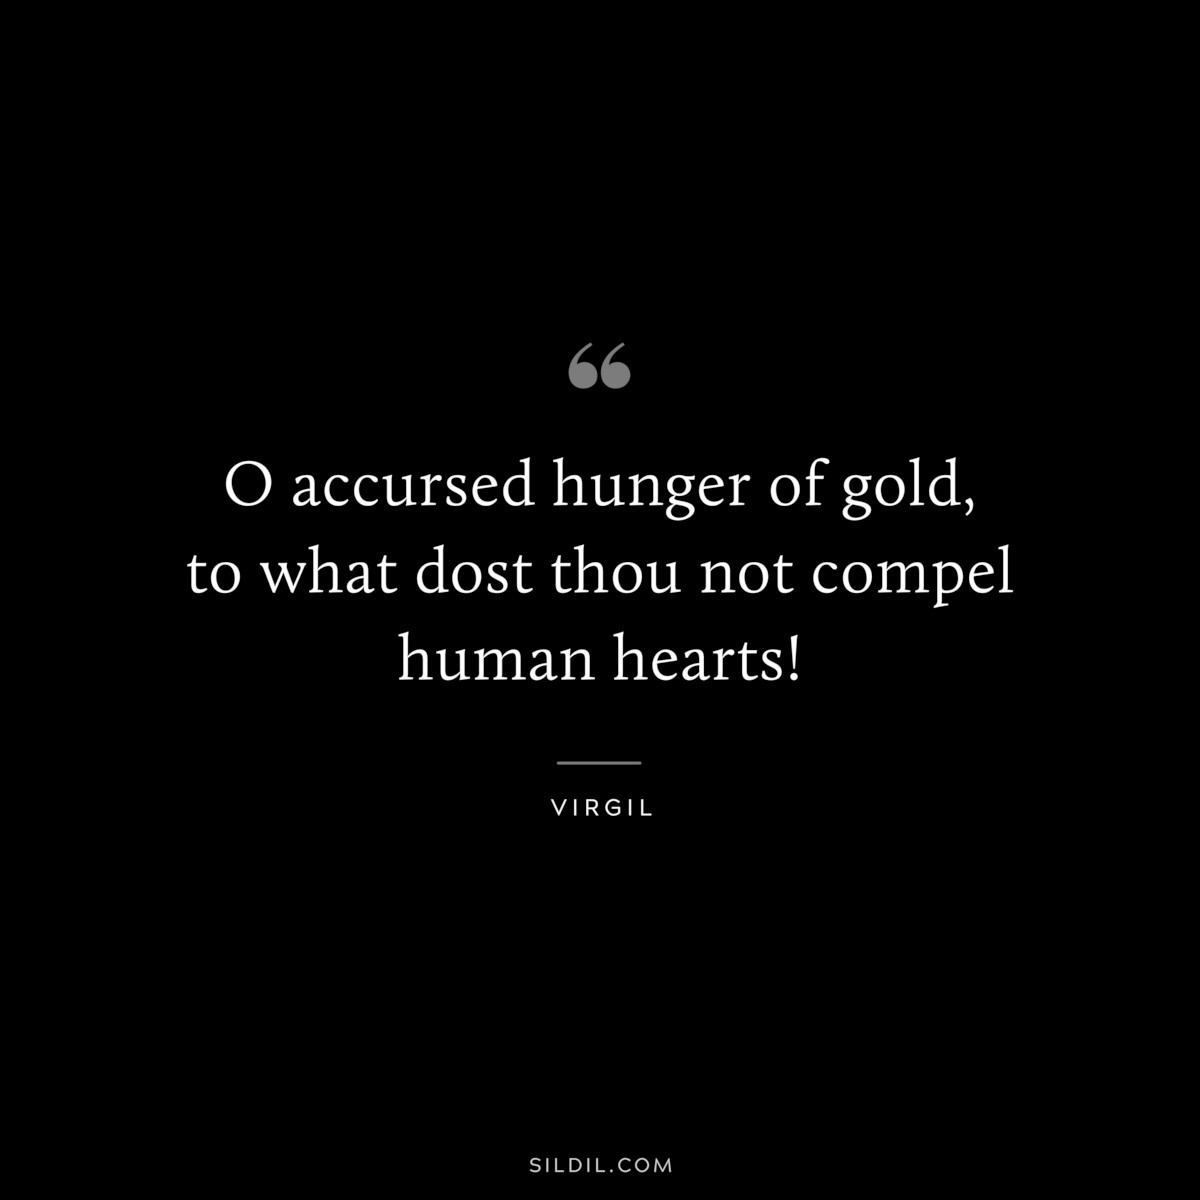 O accursed hunger of gold, to what dost thou not compel human hearts! ― Virgil